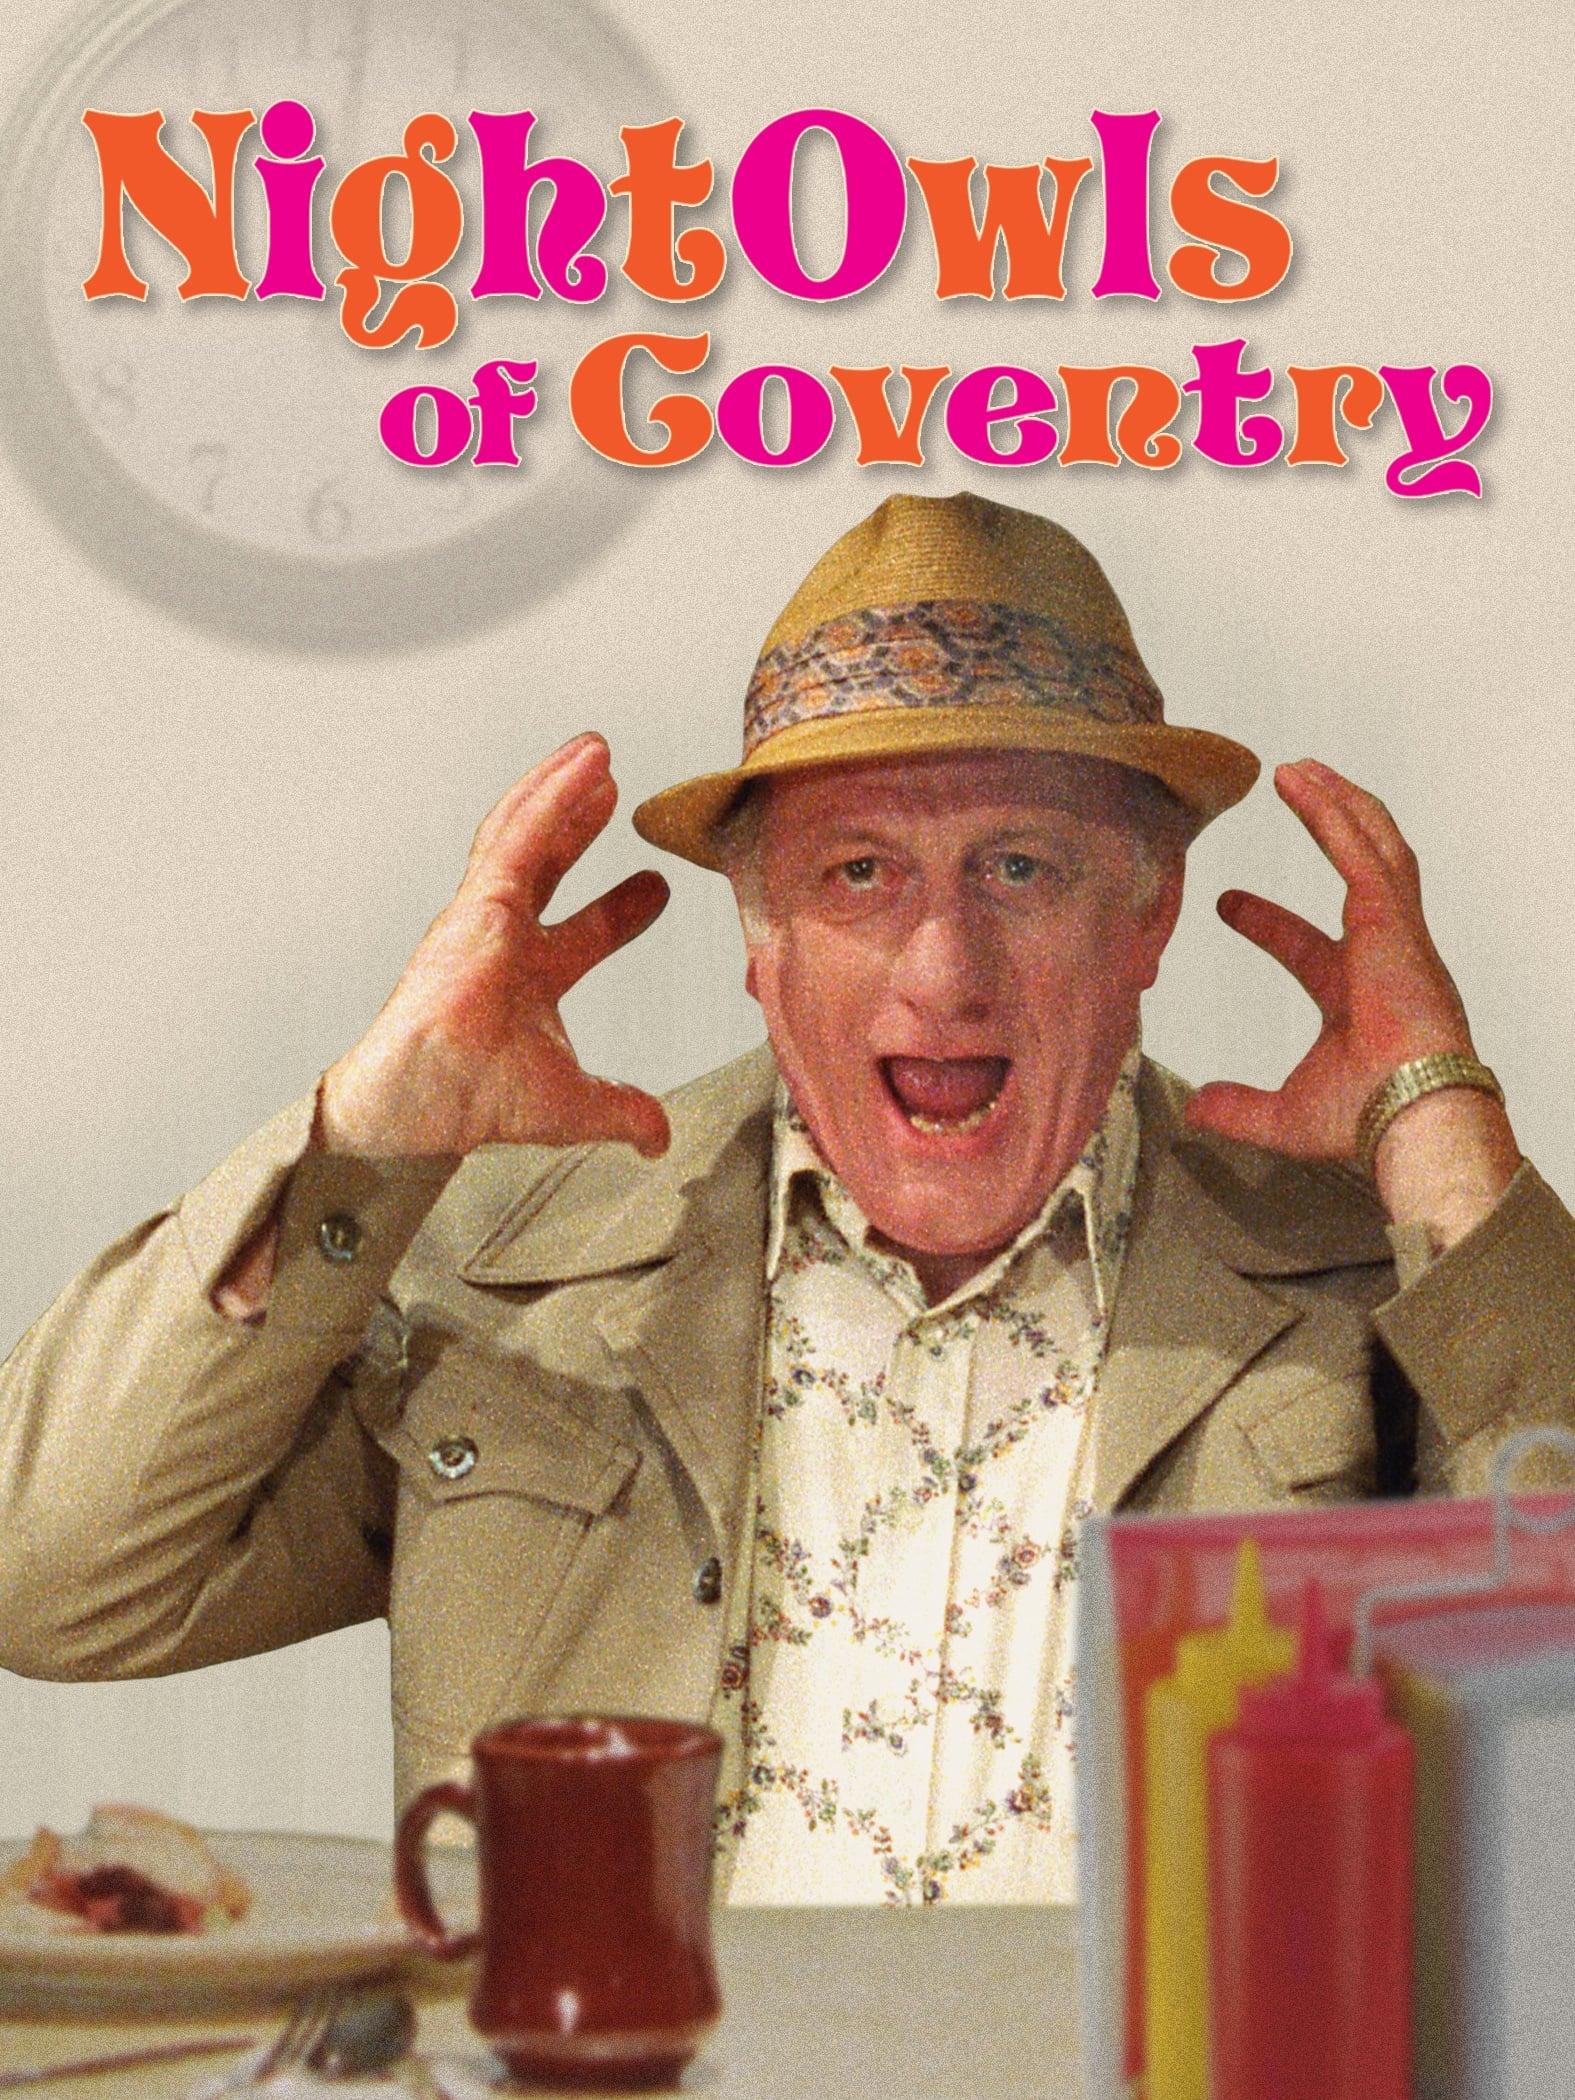 The Nightowls of Coventry poster